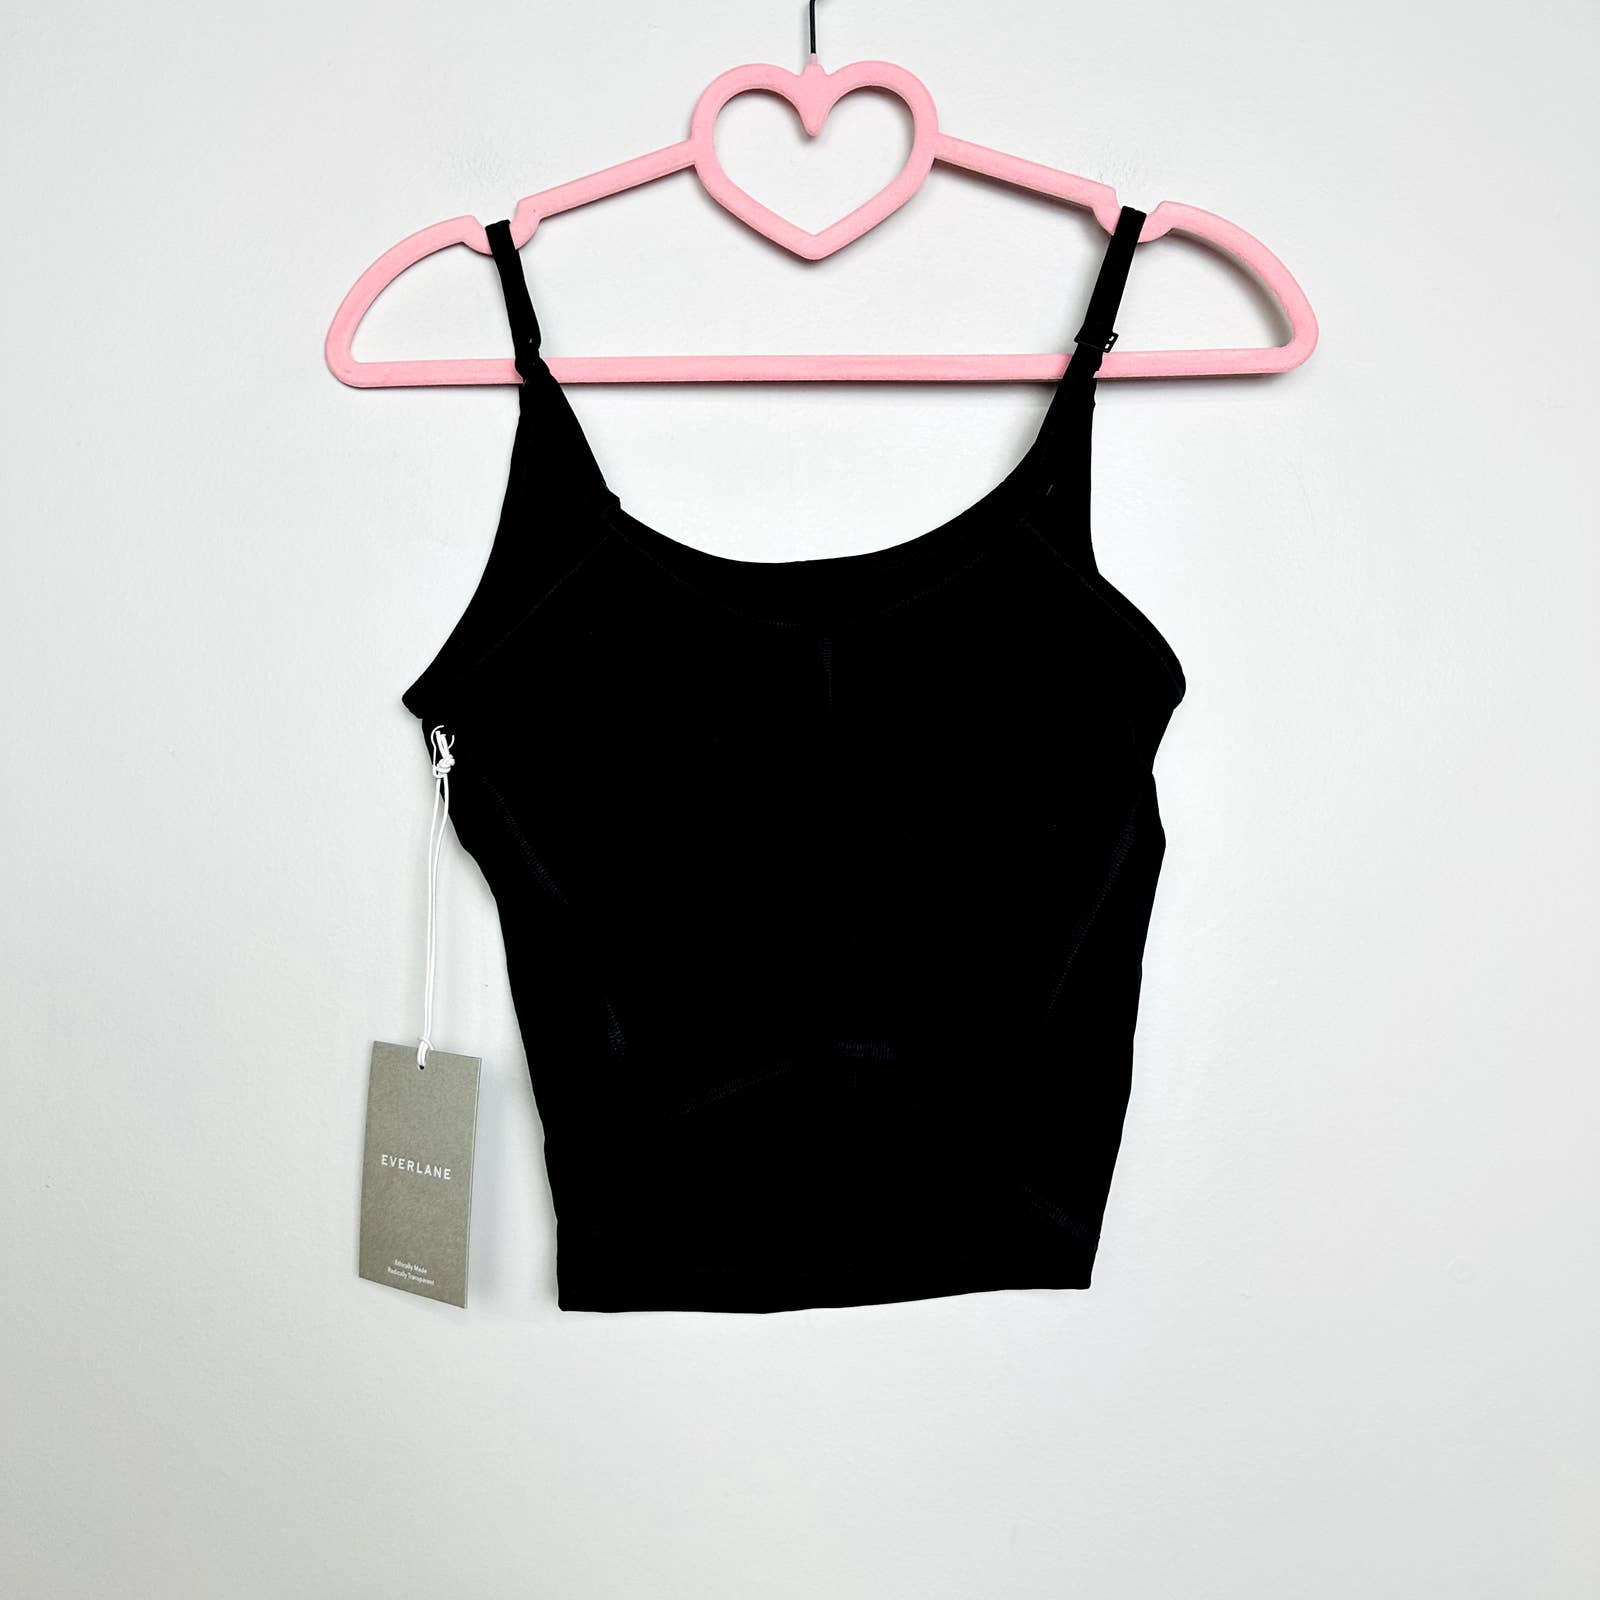 Everlane NWT Sporty The Perform Cami Scoop Neck Cropped Tank Top Black Size XS